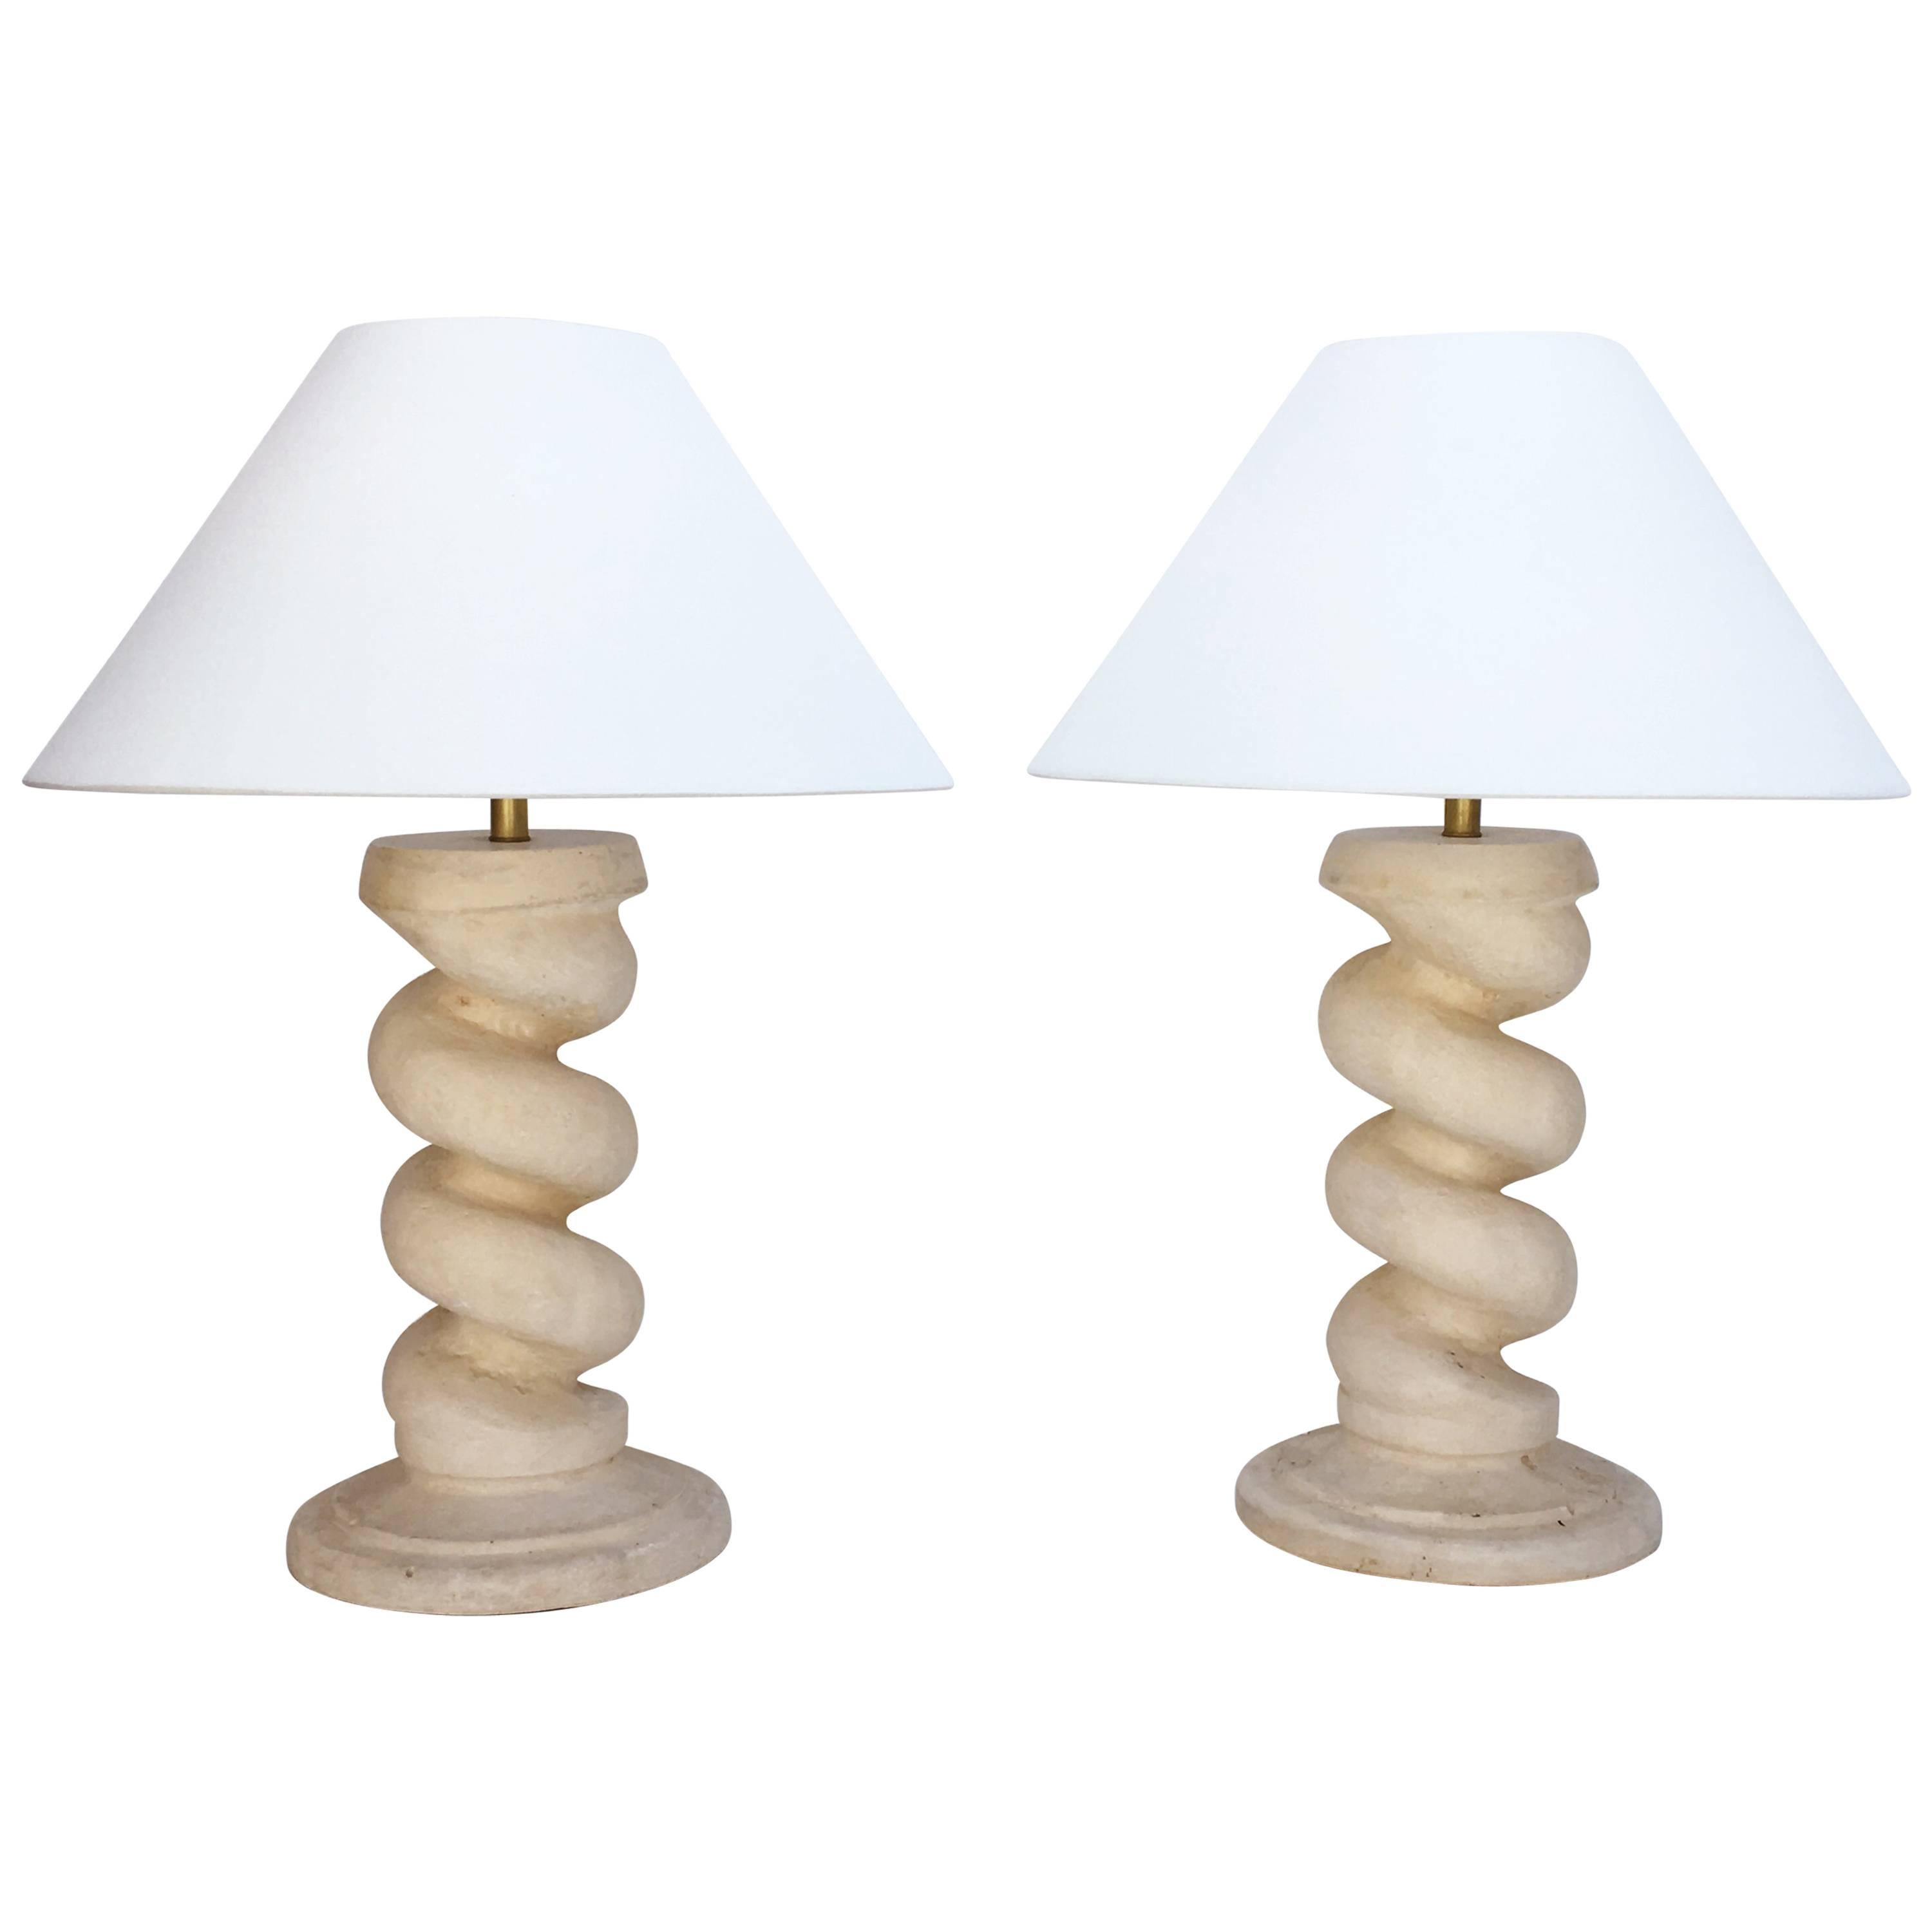 Pair of Plaster Spiral Column Lamps by Michael Taylor